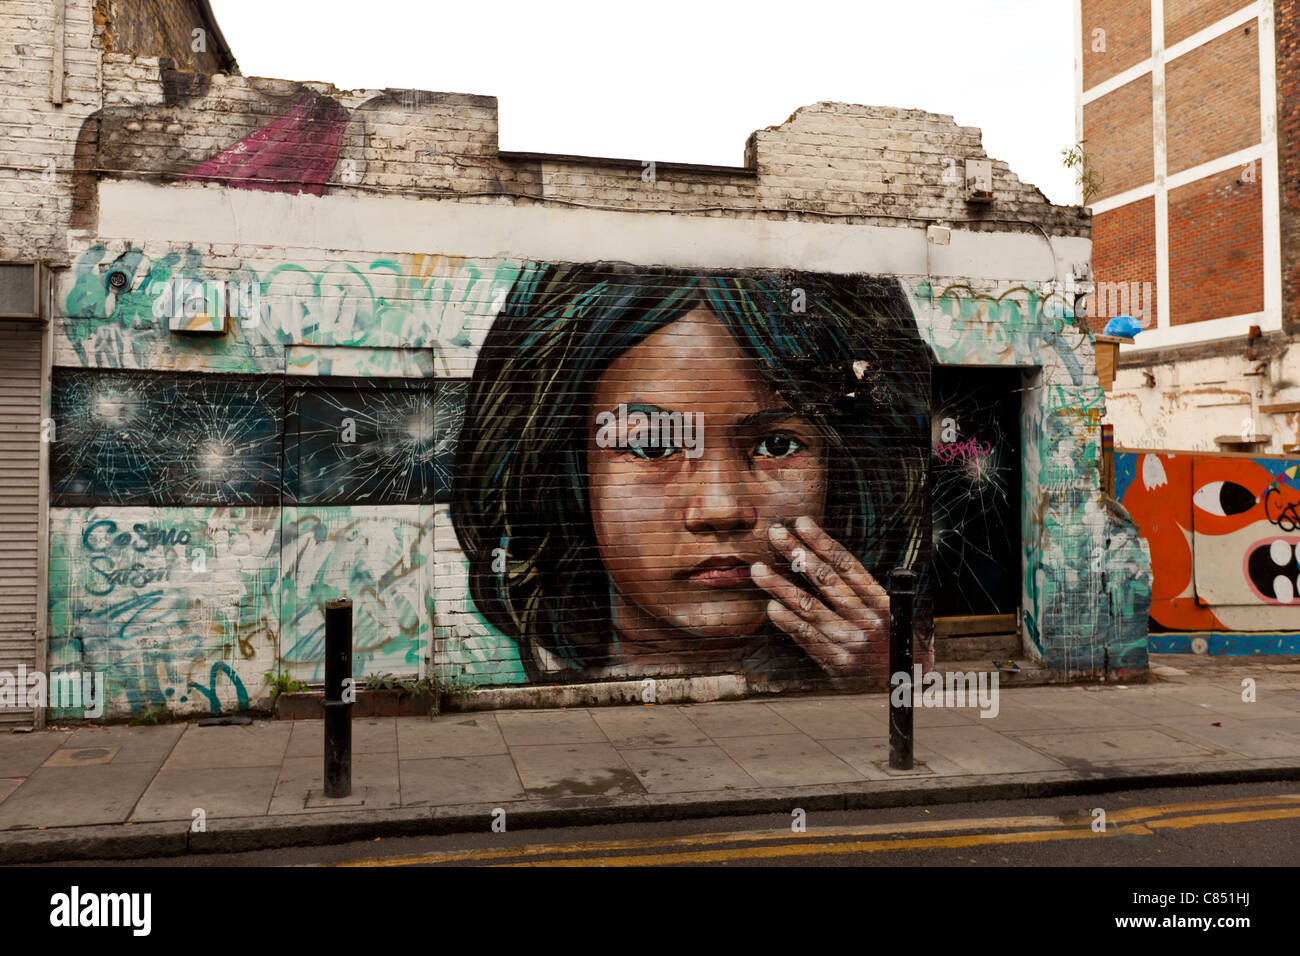 Street art by Cosmo Sarson, Hanbury street London, England.  ‘The image is of a Bangladeshi girl surrounded by decay' Stock Photo